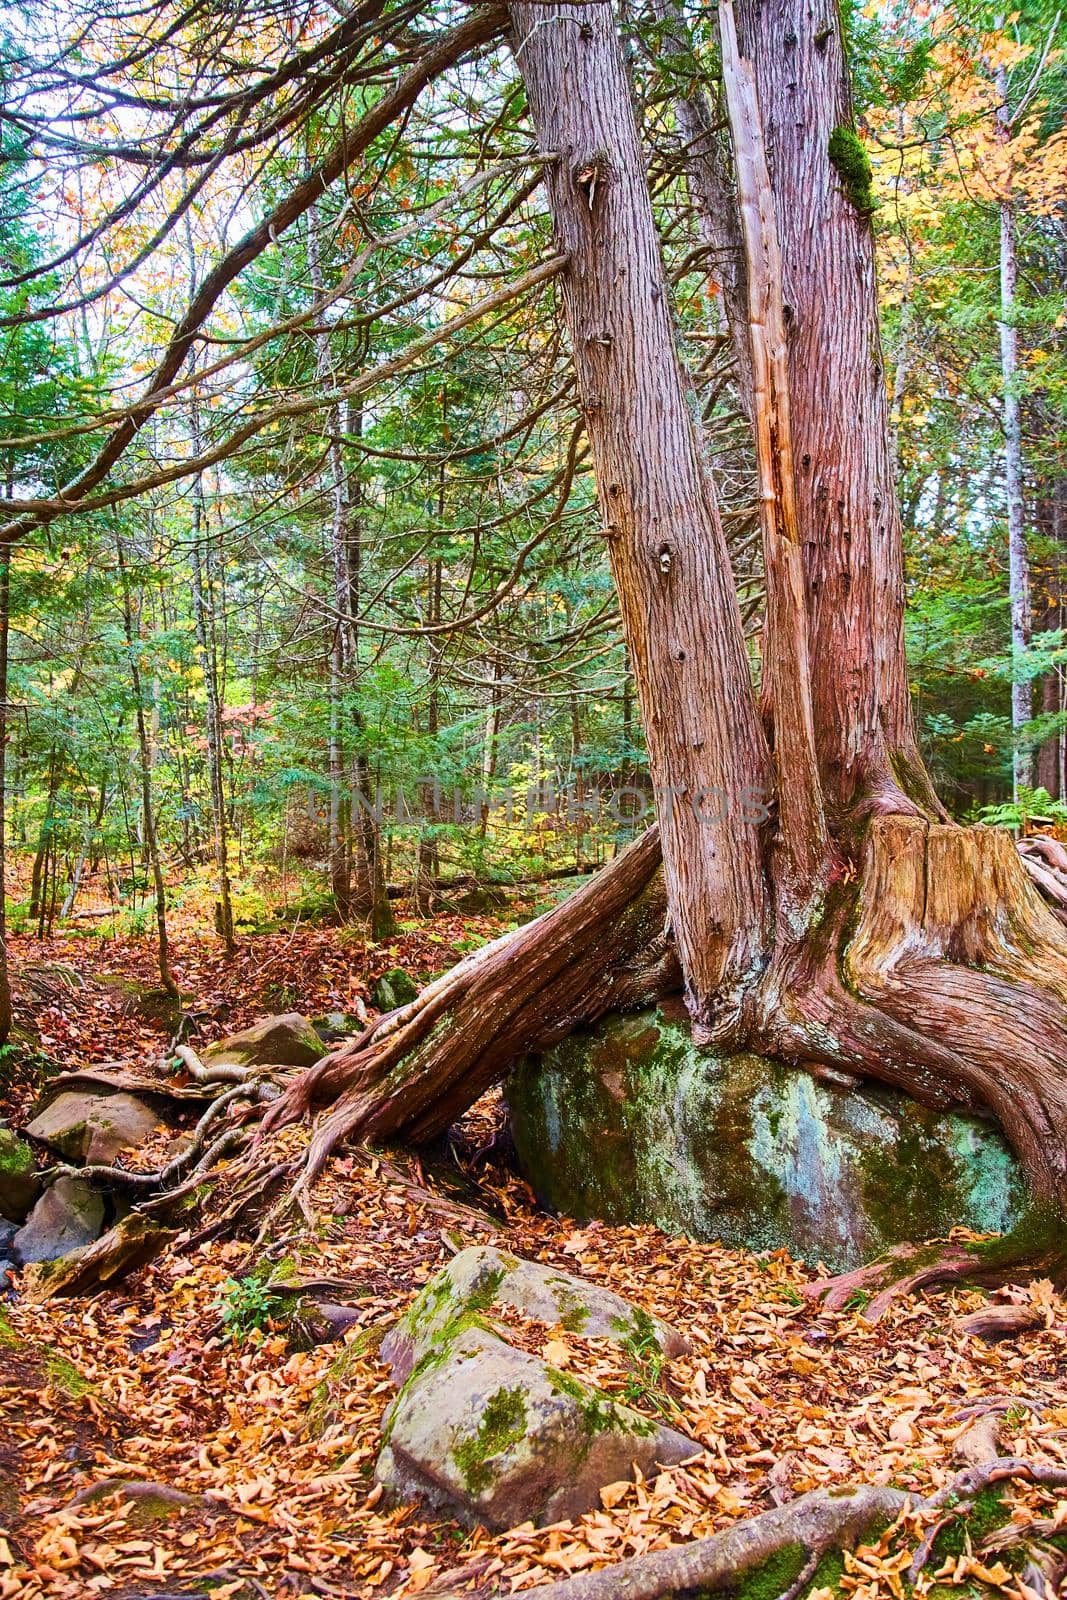 Image of Twin combined trees growing atop giant bolder in a forest with fallen leaves strewn across the ground